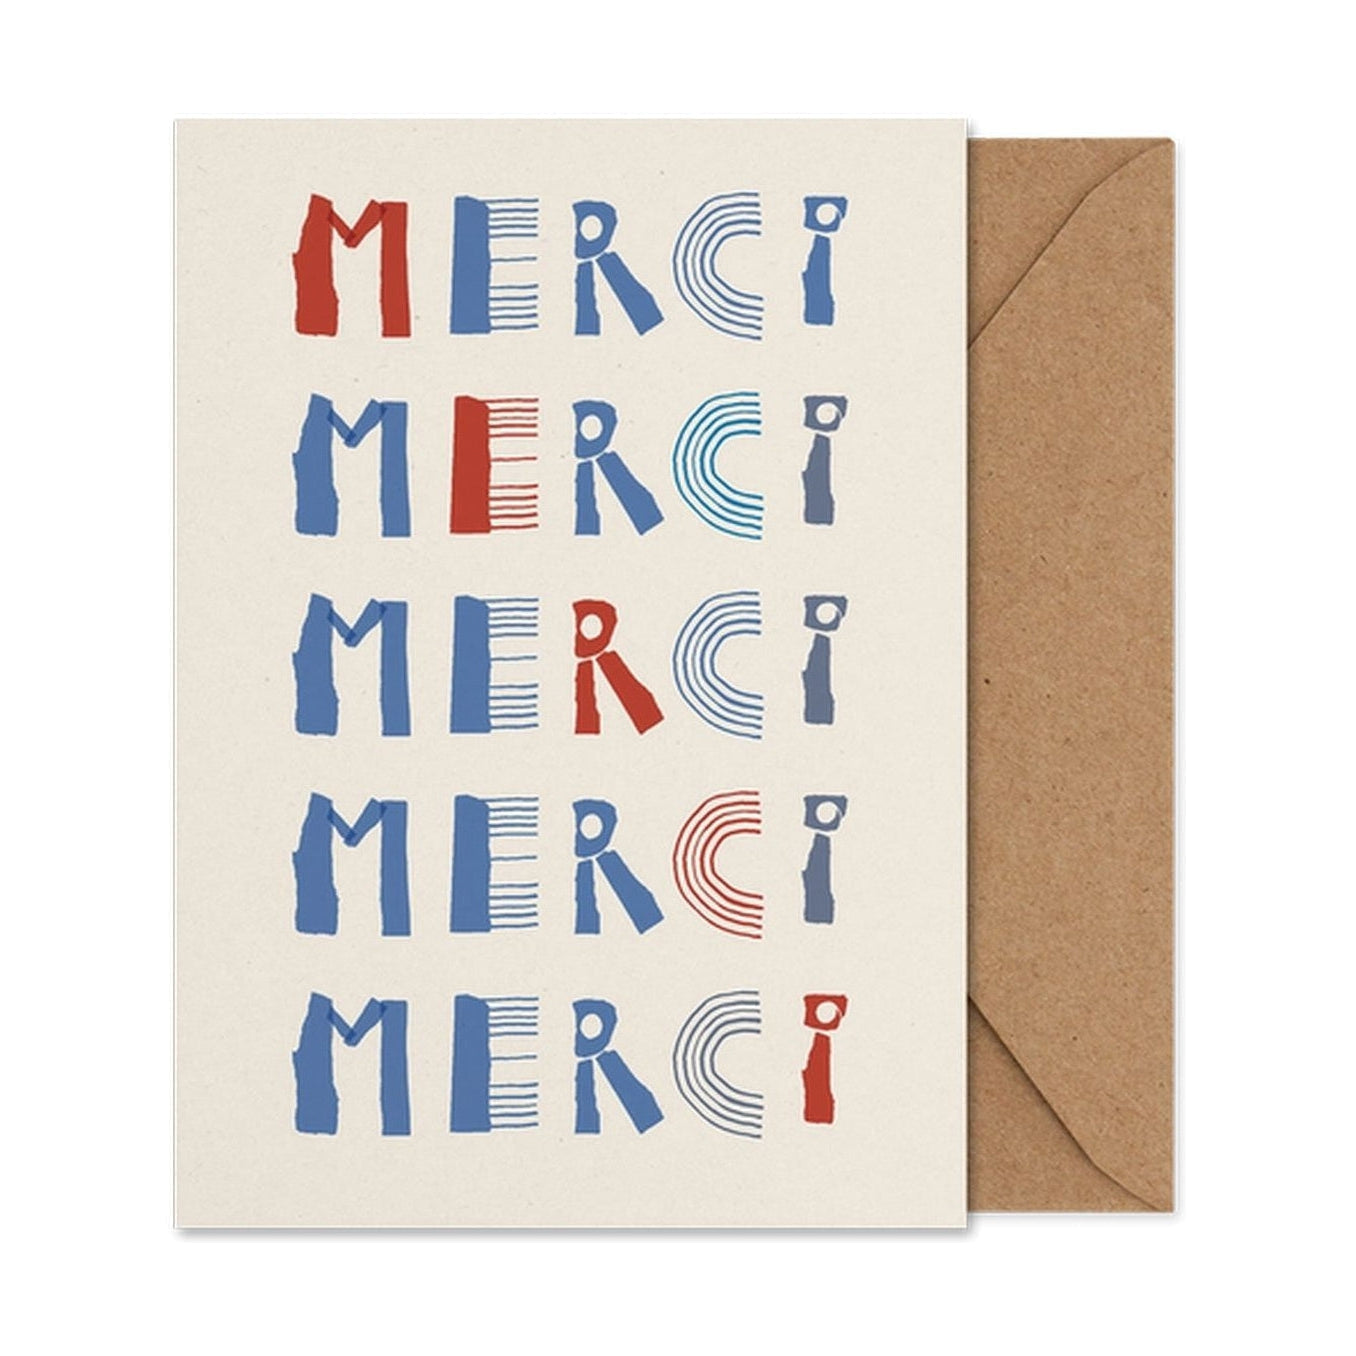 Paper Collective Mercifolded Art Card Poster, A5